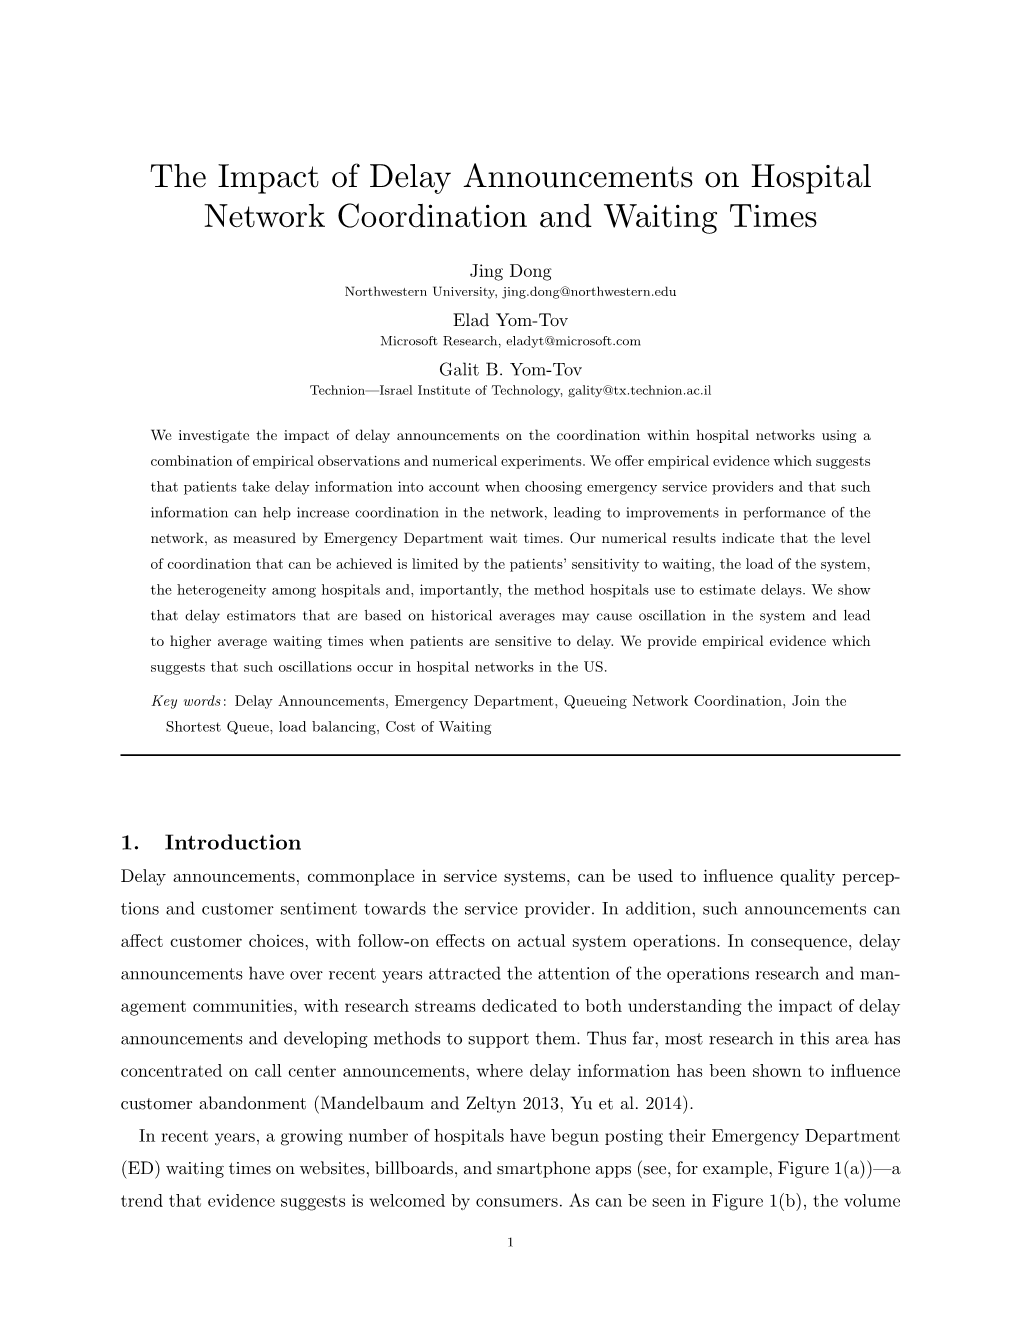 The Impact of Delay Announcements on Hospital Network Coordination and Waiting Times